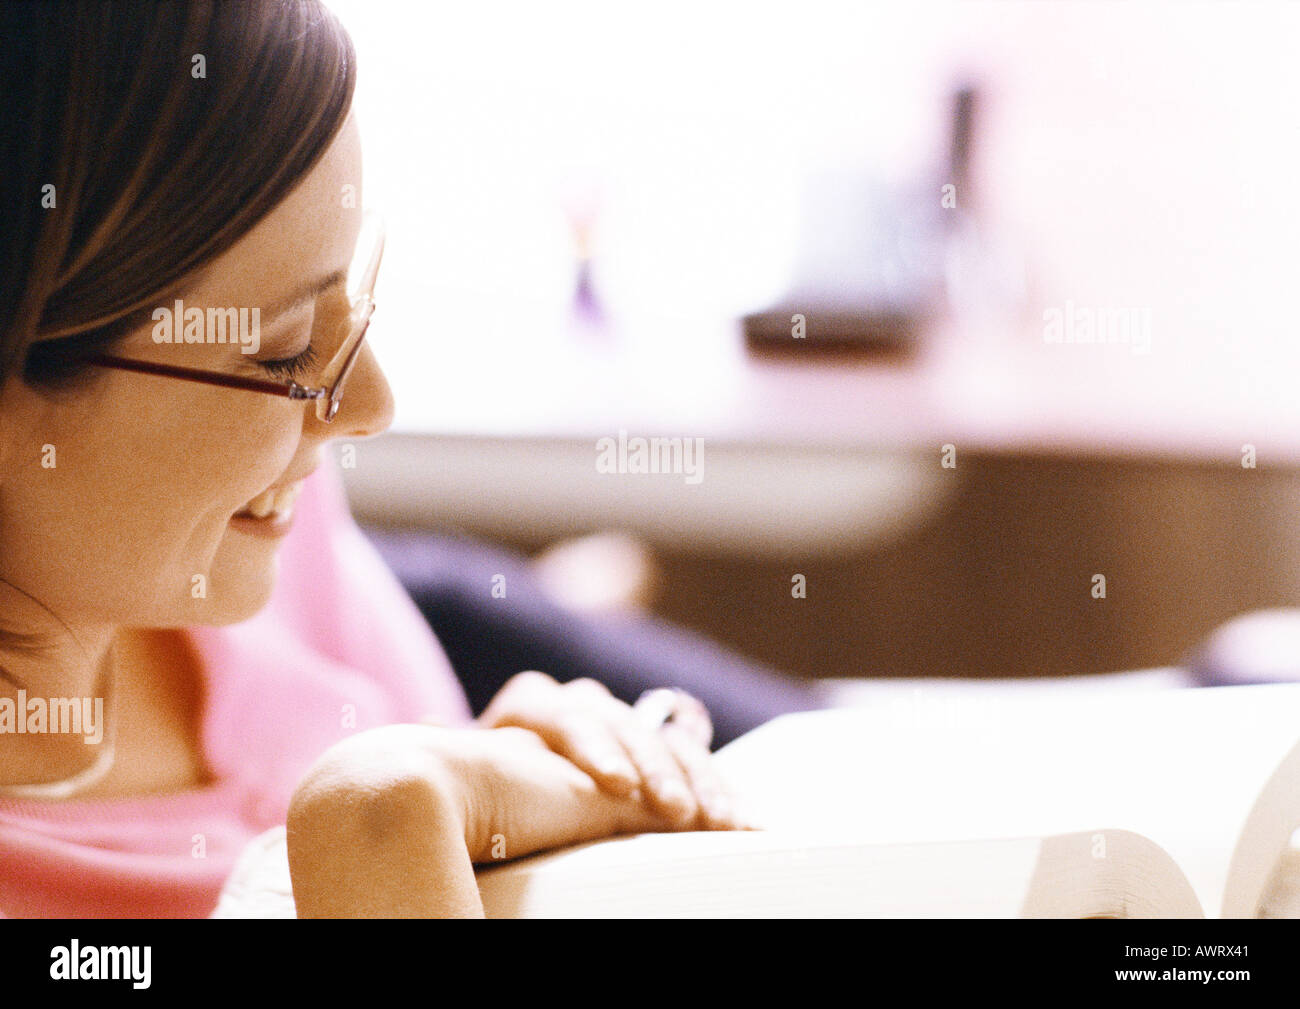 Woman reading book, smiling, close-up Stock Photo